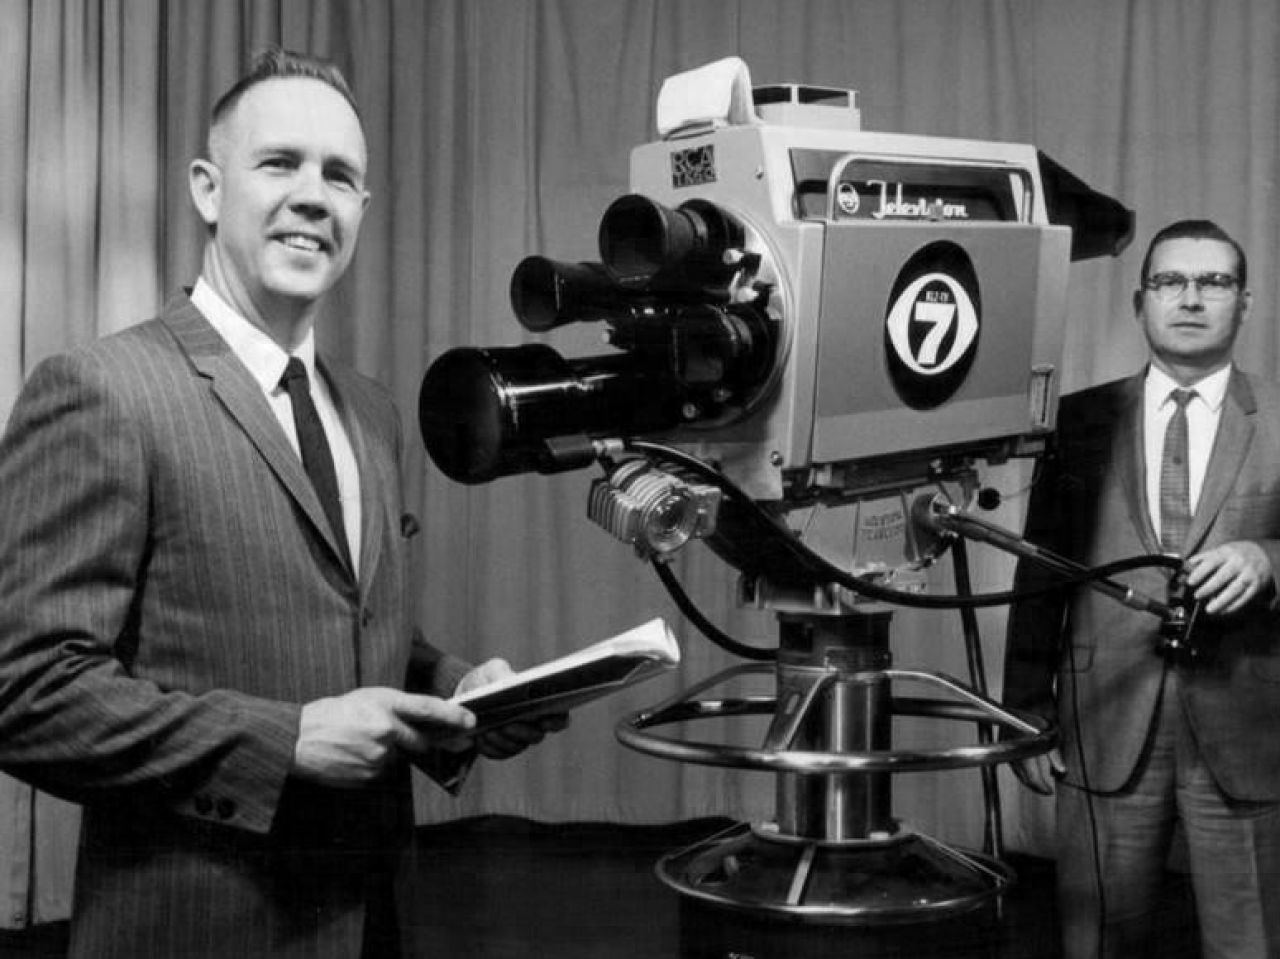 Photo of the taping of a religious public affairs program at KLZ-TV, Denver in 1968. Two men in suits, one behind a vintage television camera.